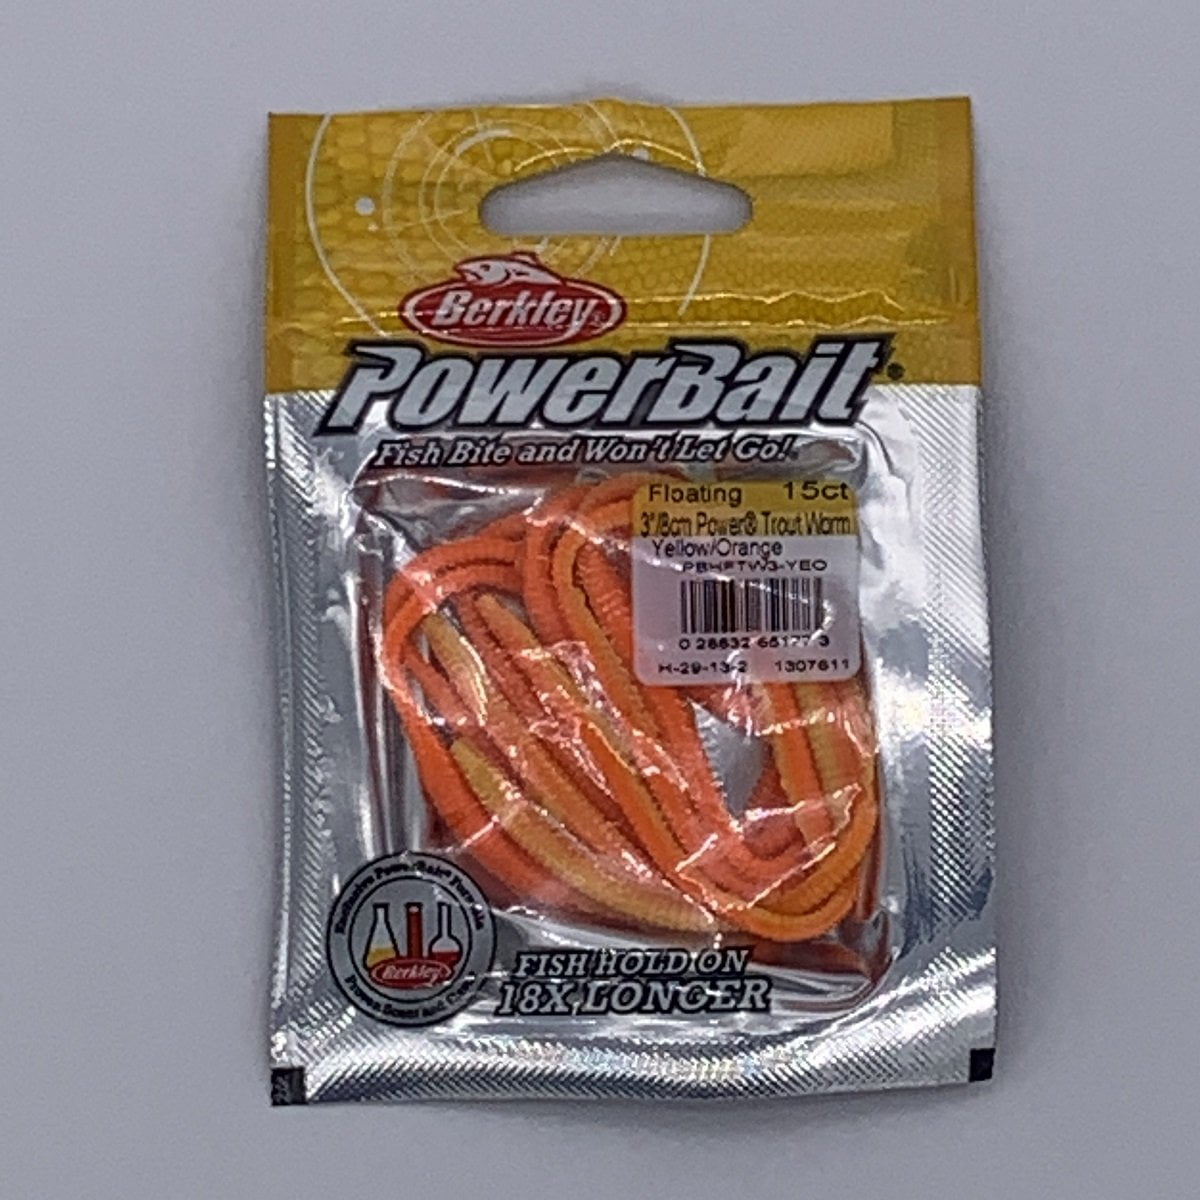 2 - Berkley Powerbait Floating Trout Worm - 15/Ct - 3 - Pink Shad & Natural